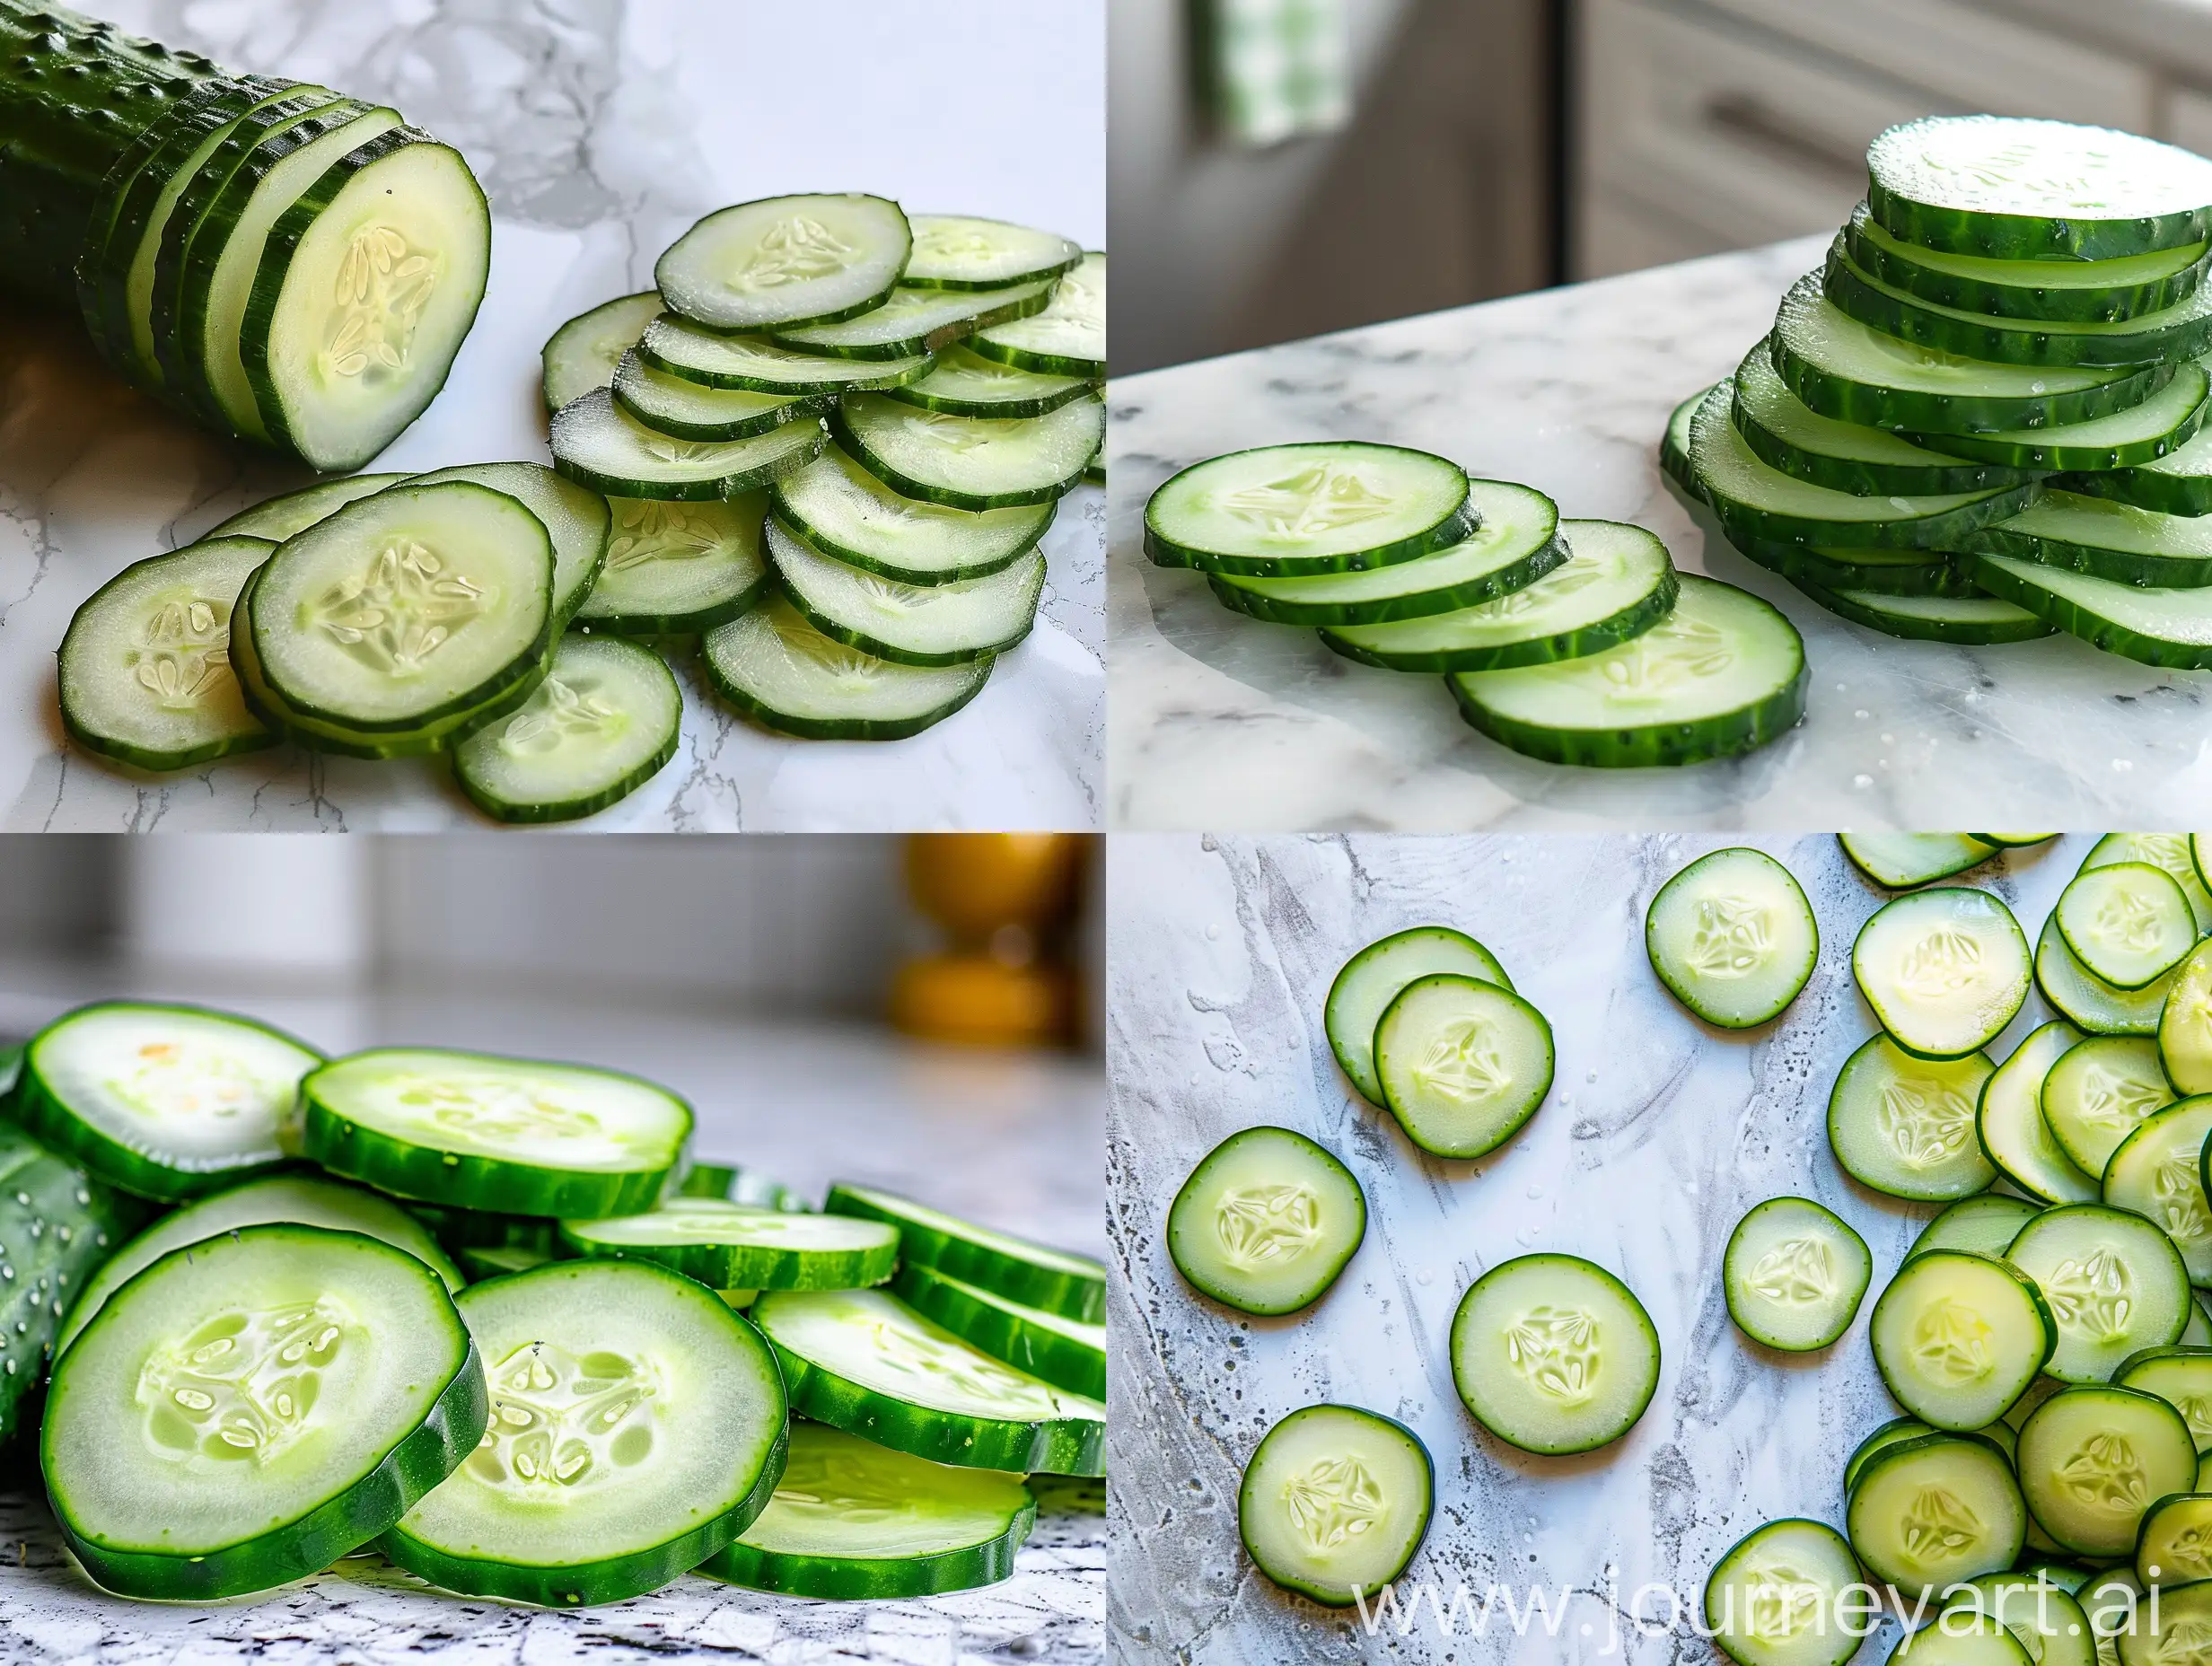 Real natural light shot of some sliced cucumbers on the kitchen table